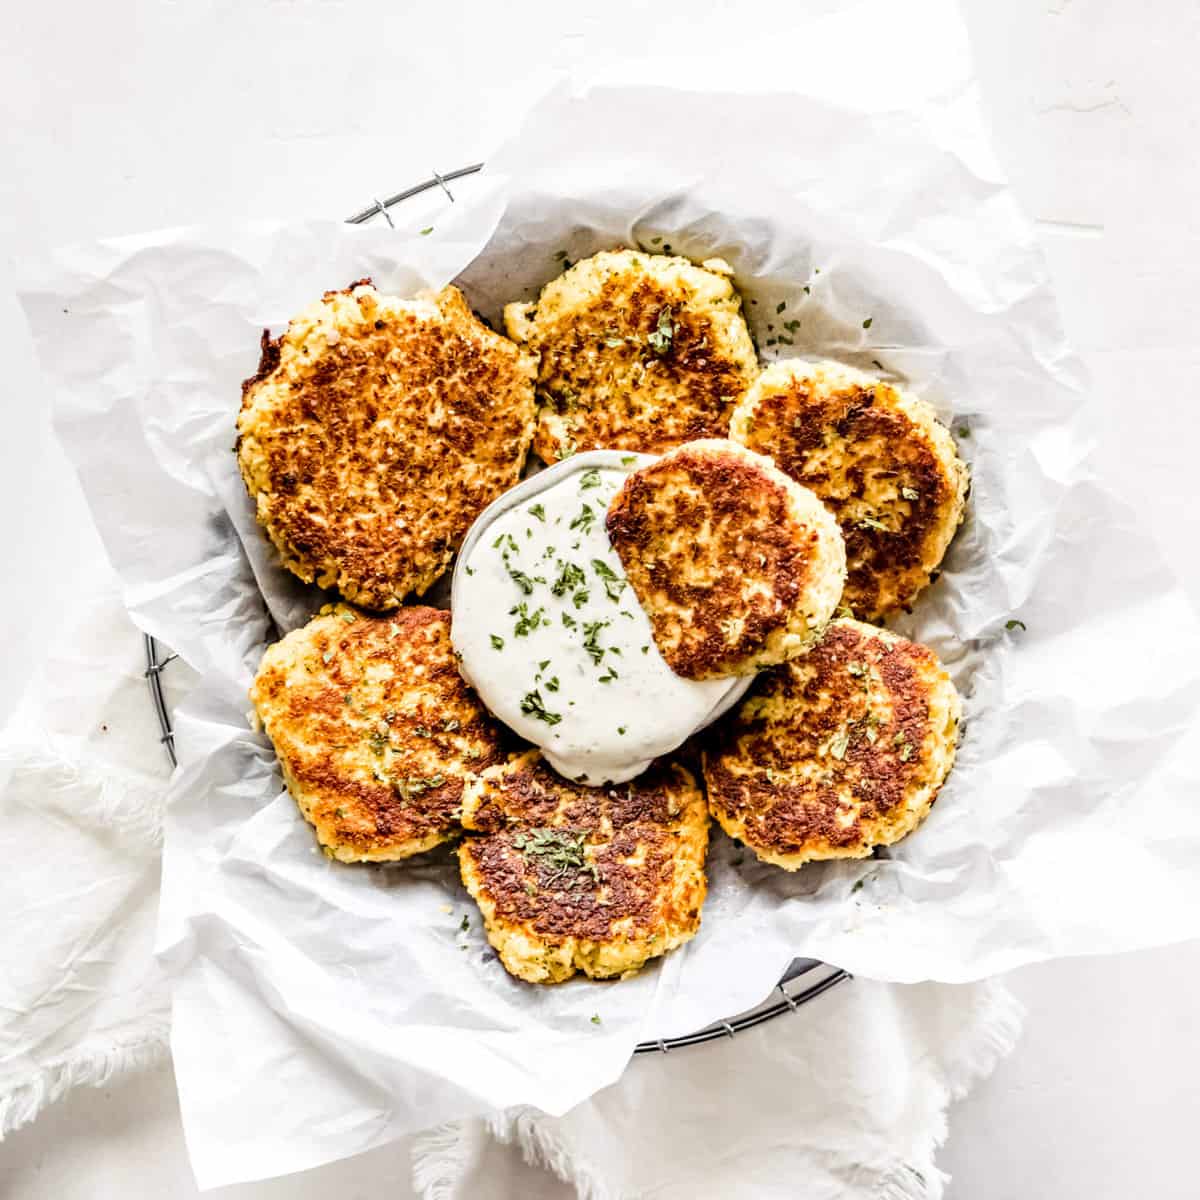 A circle tray of fritters made out of cauliflower and homemade ranch dressing